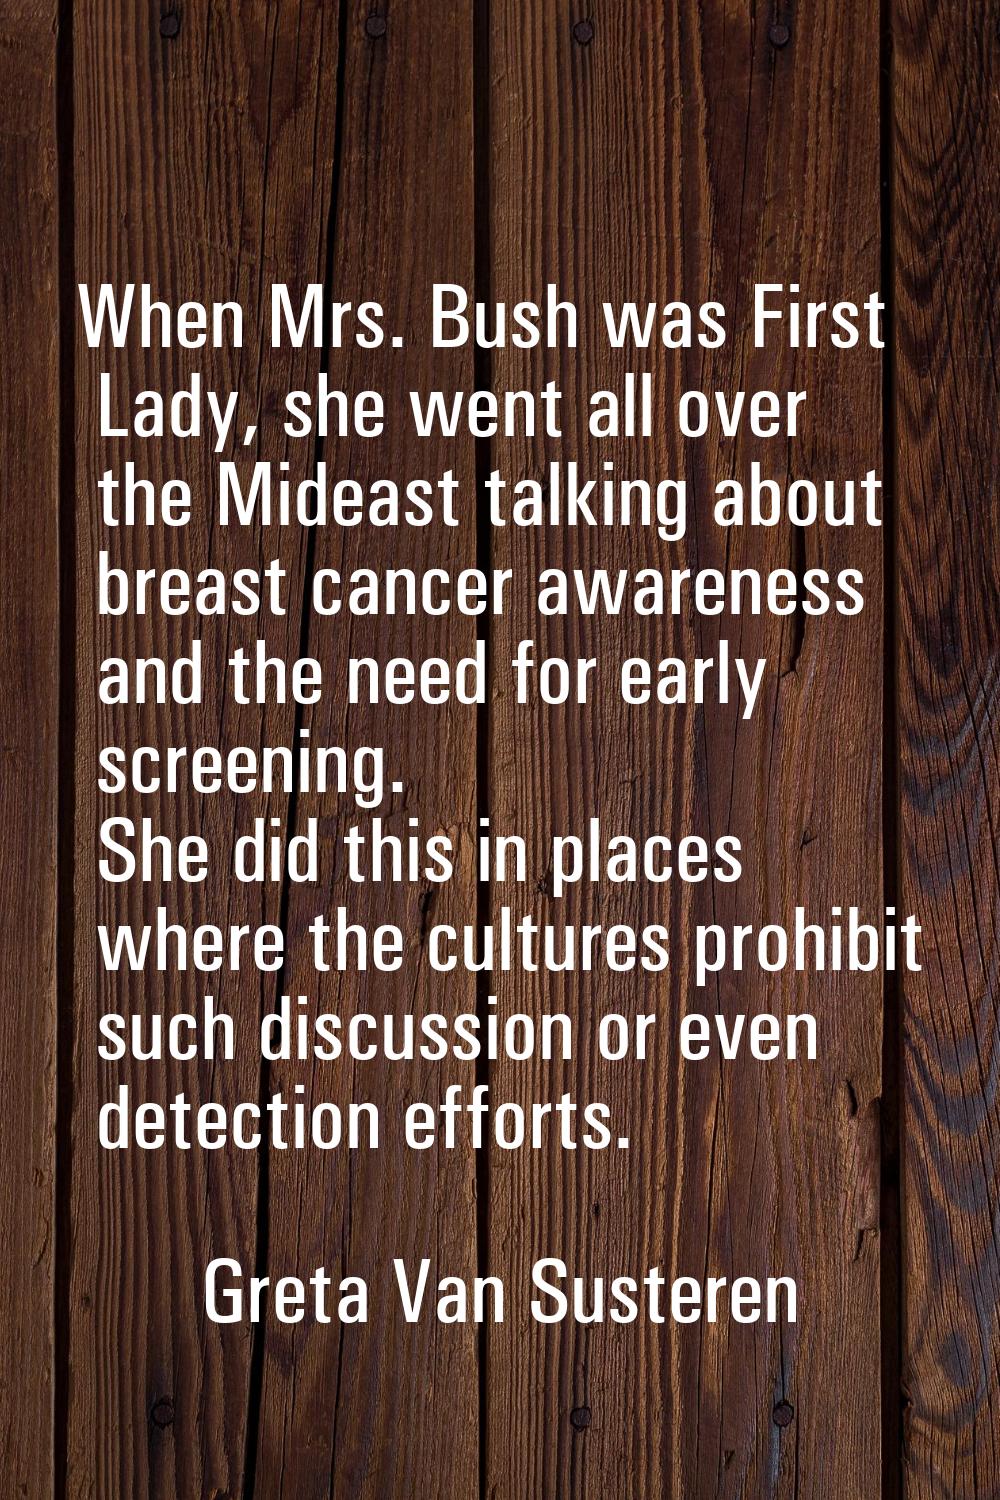 When Mrs. Bush was First Lady, she went all over the Mideast talking about breast cancer awareness 